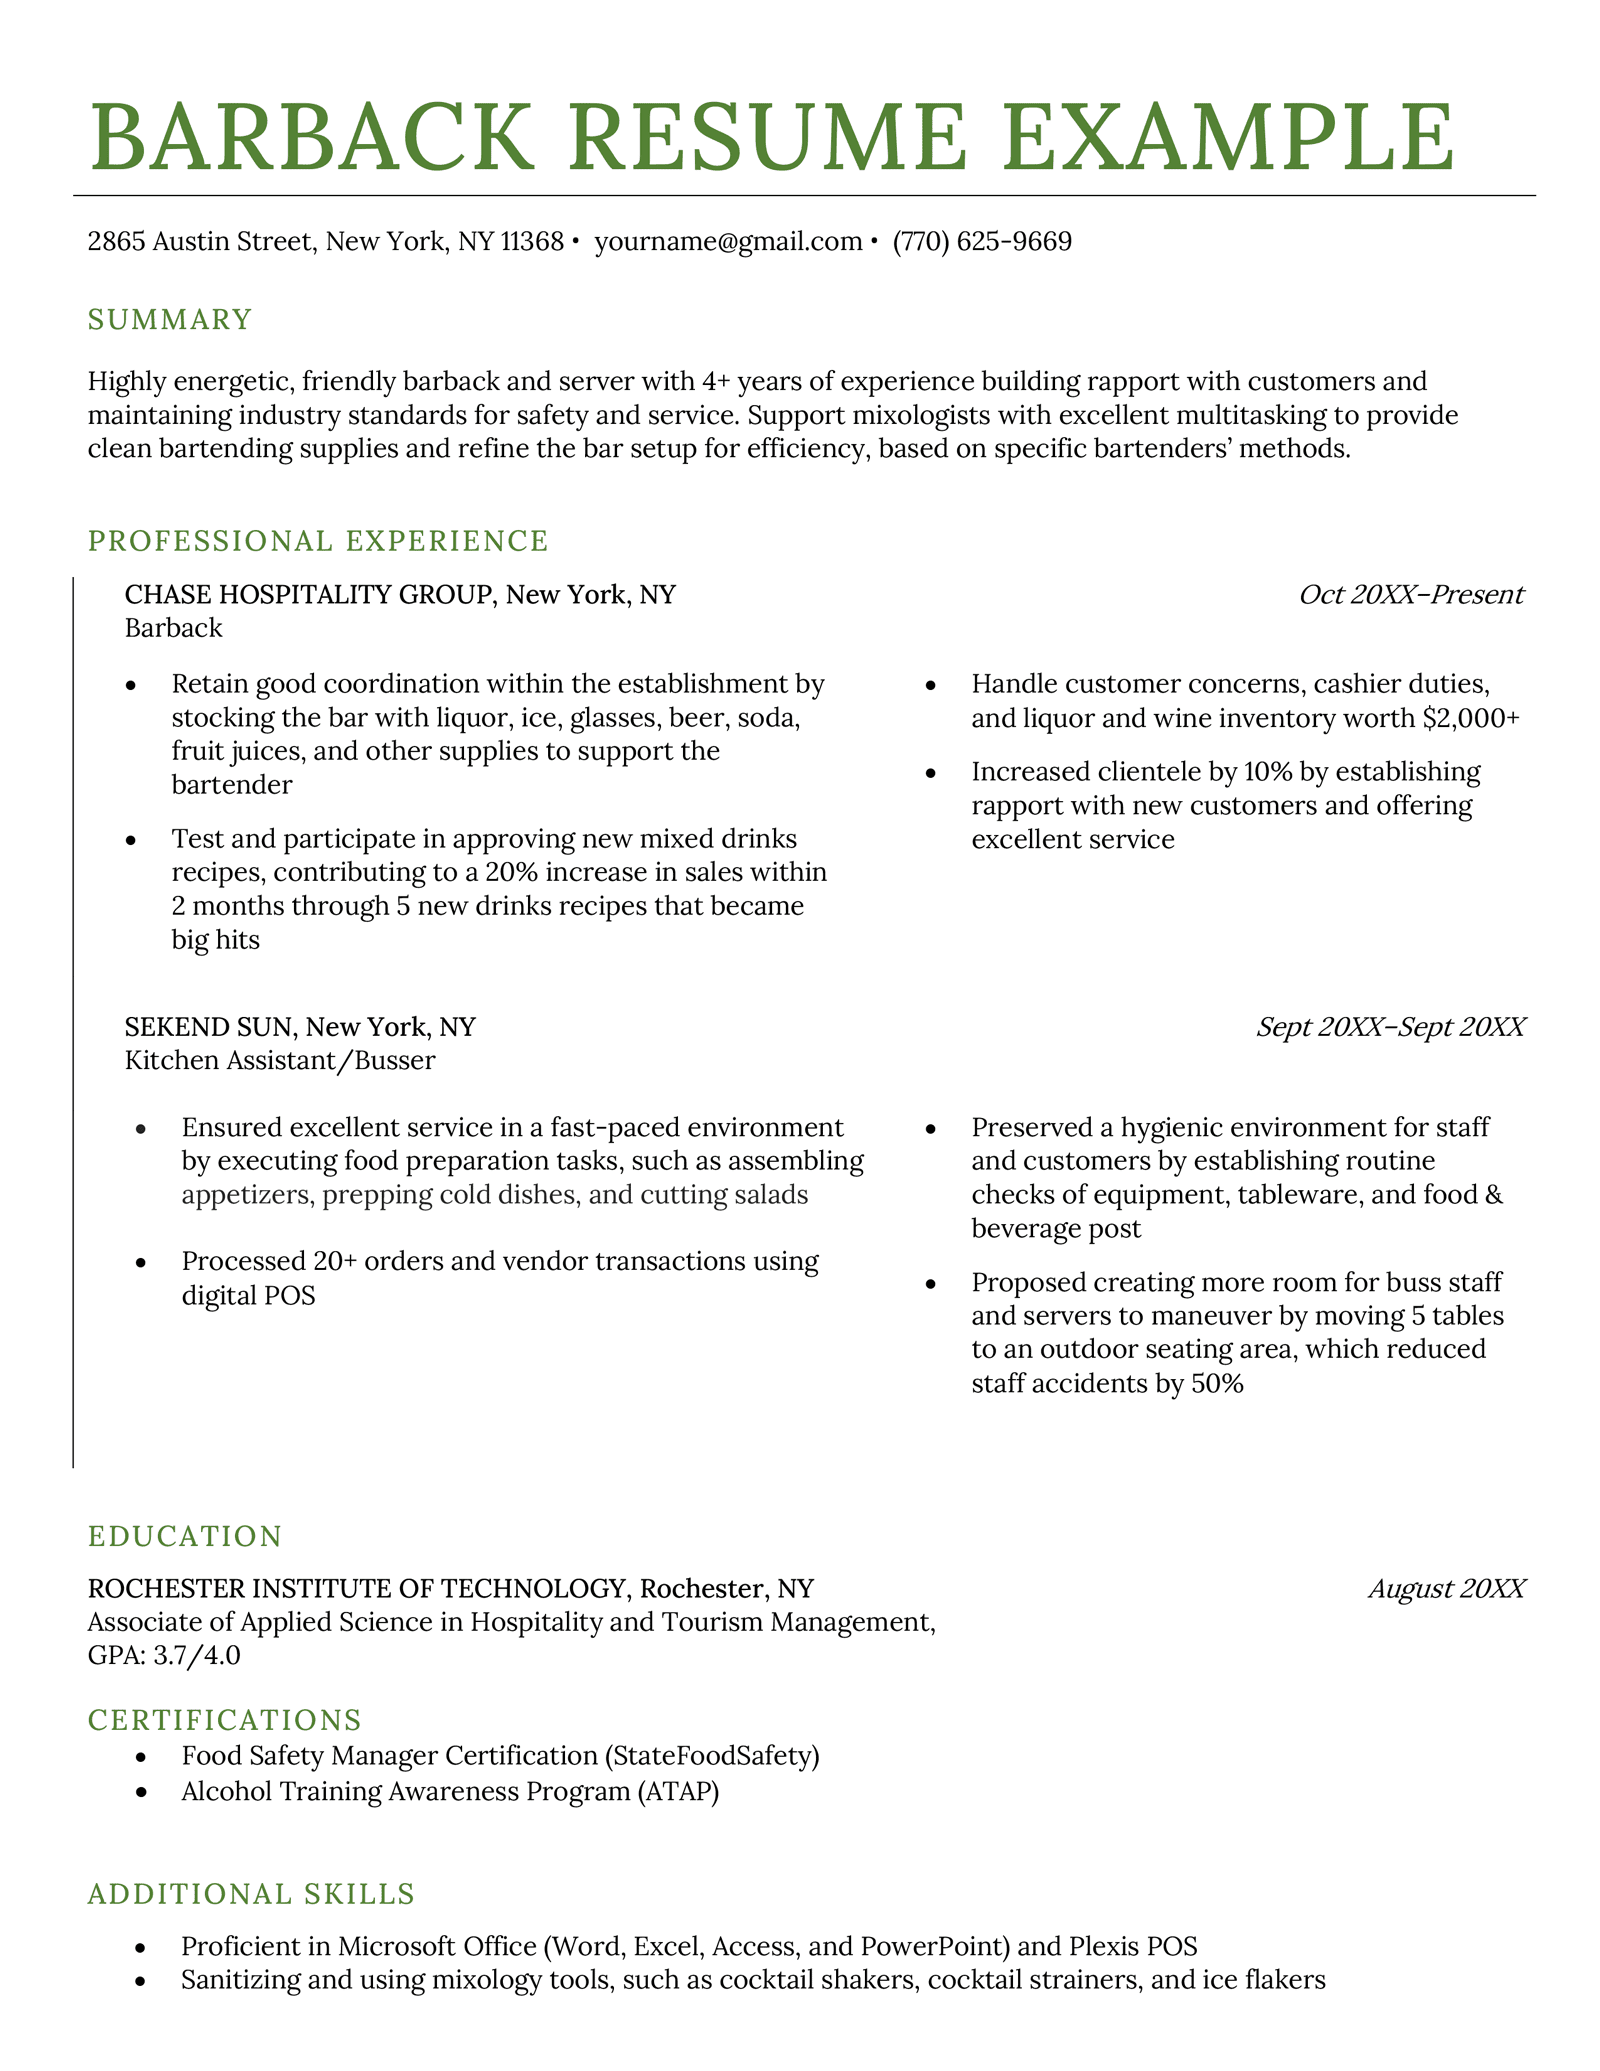 A green color scheme barback resume sample that uses a two-column layout in its work experience section and has plently of white space.